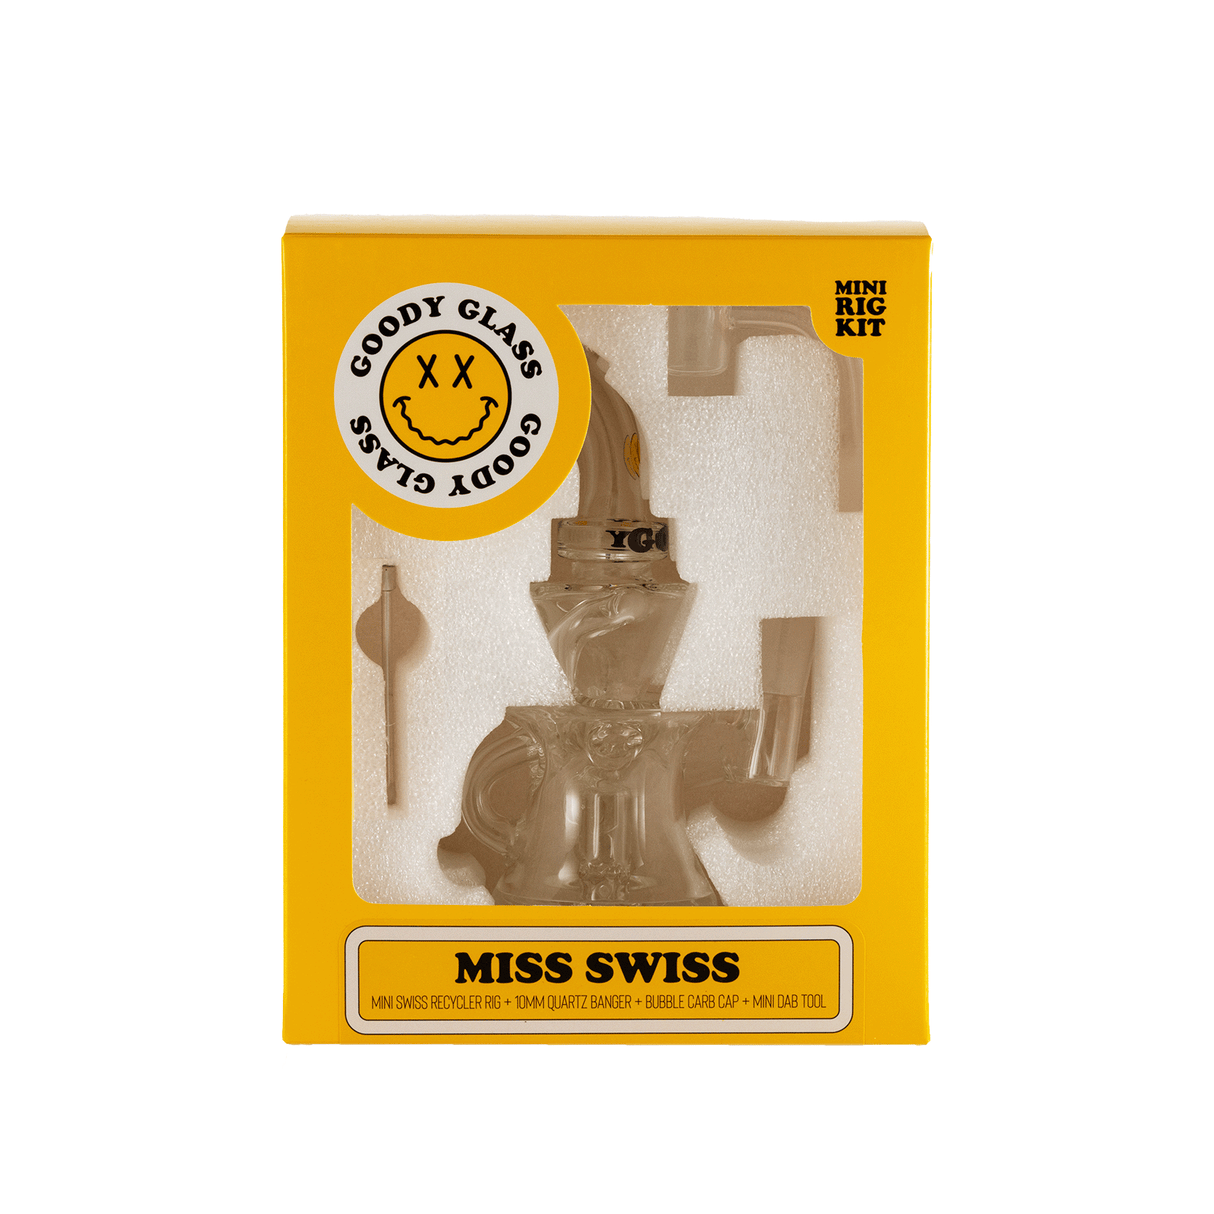 Goody Glass Miss Swiss Mini Dab Rig Kit in packaging, front view, with dab tool and quartz banger